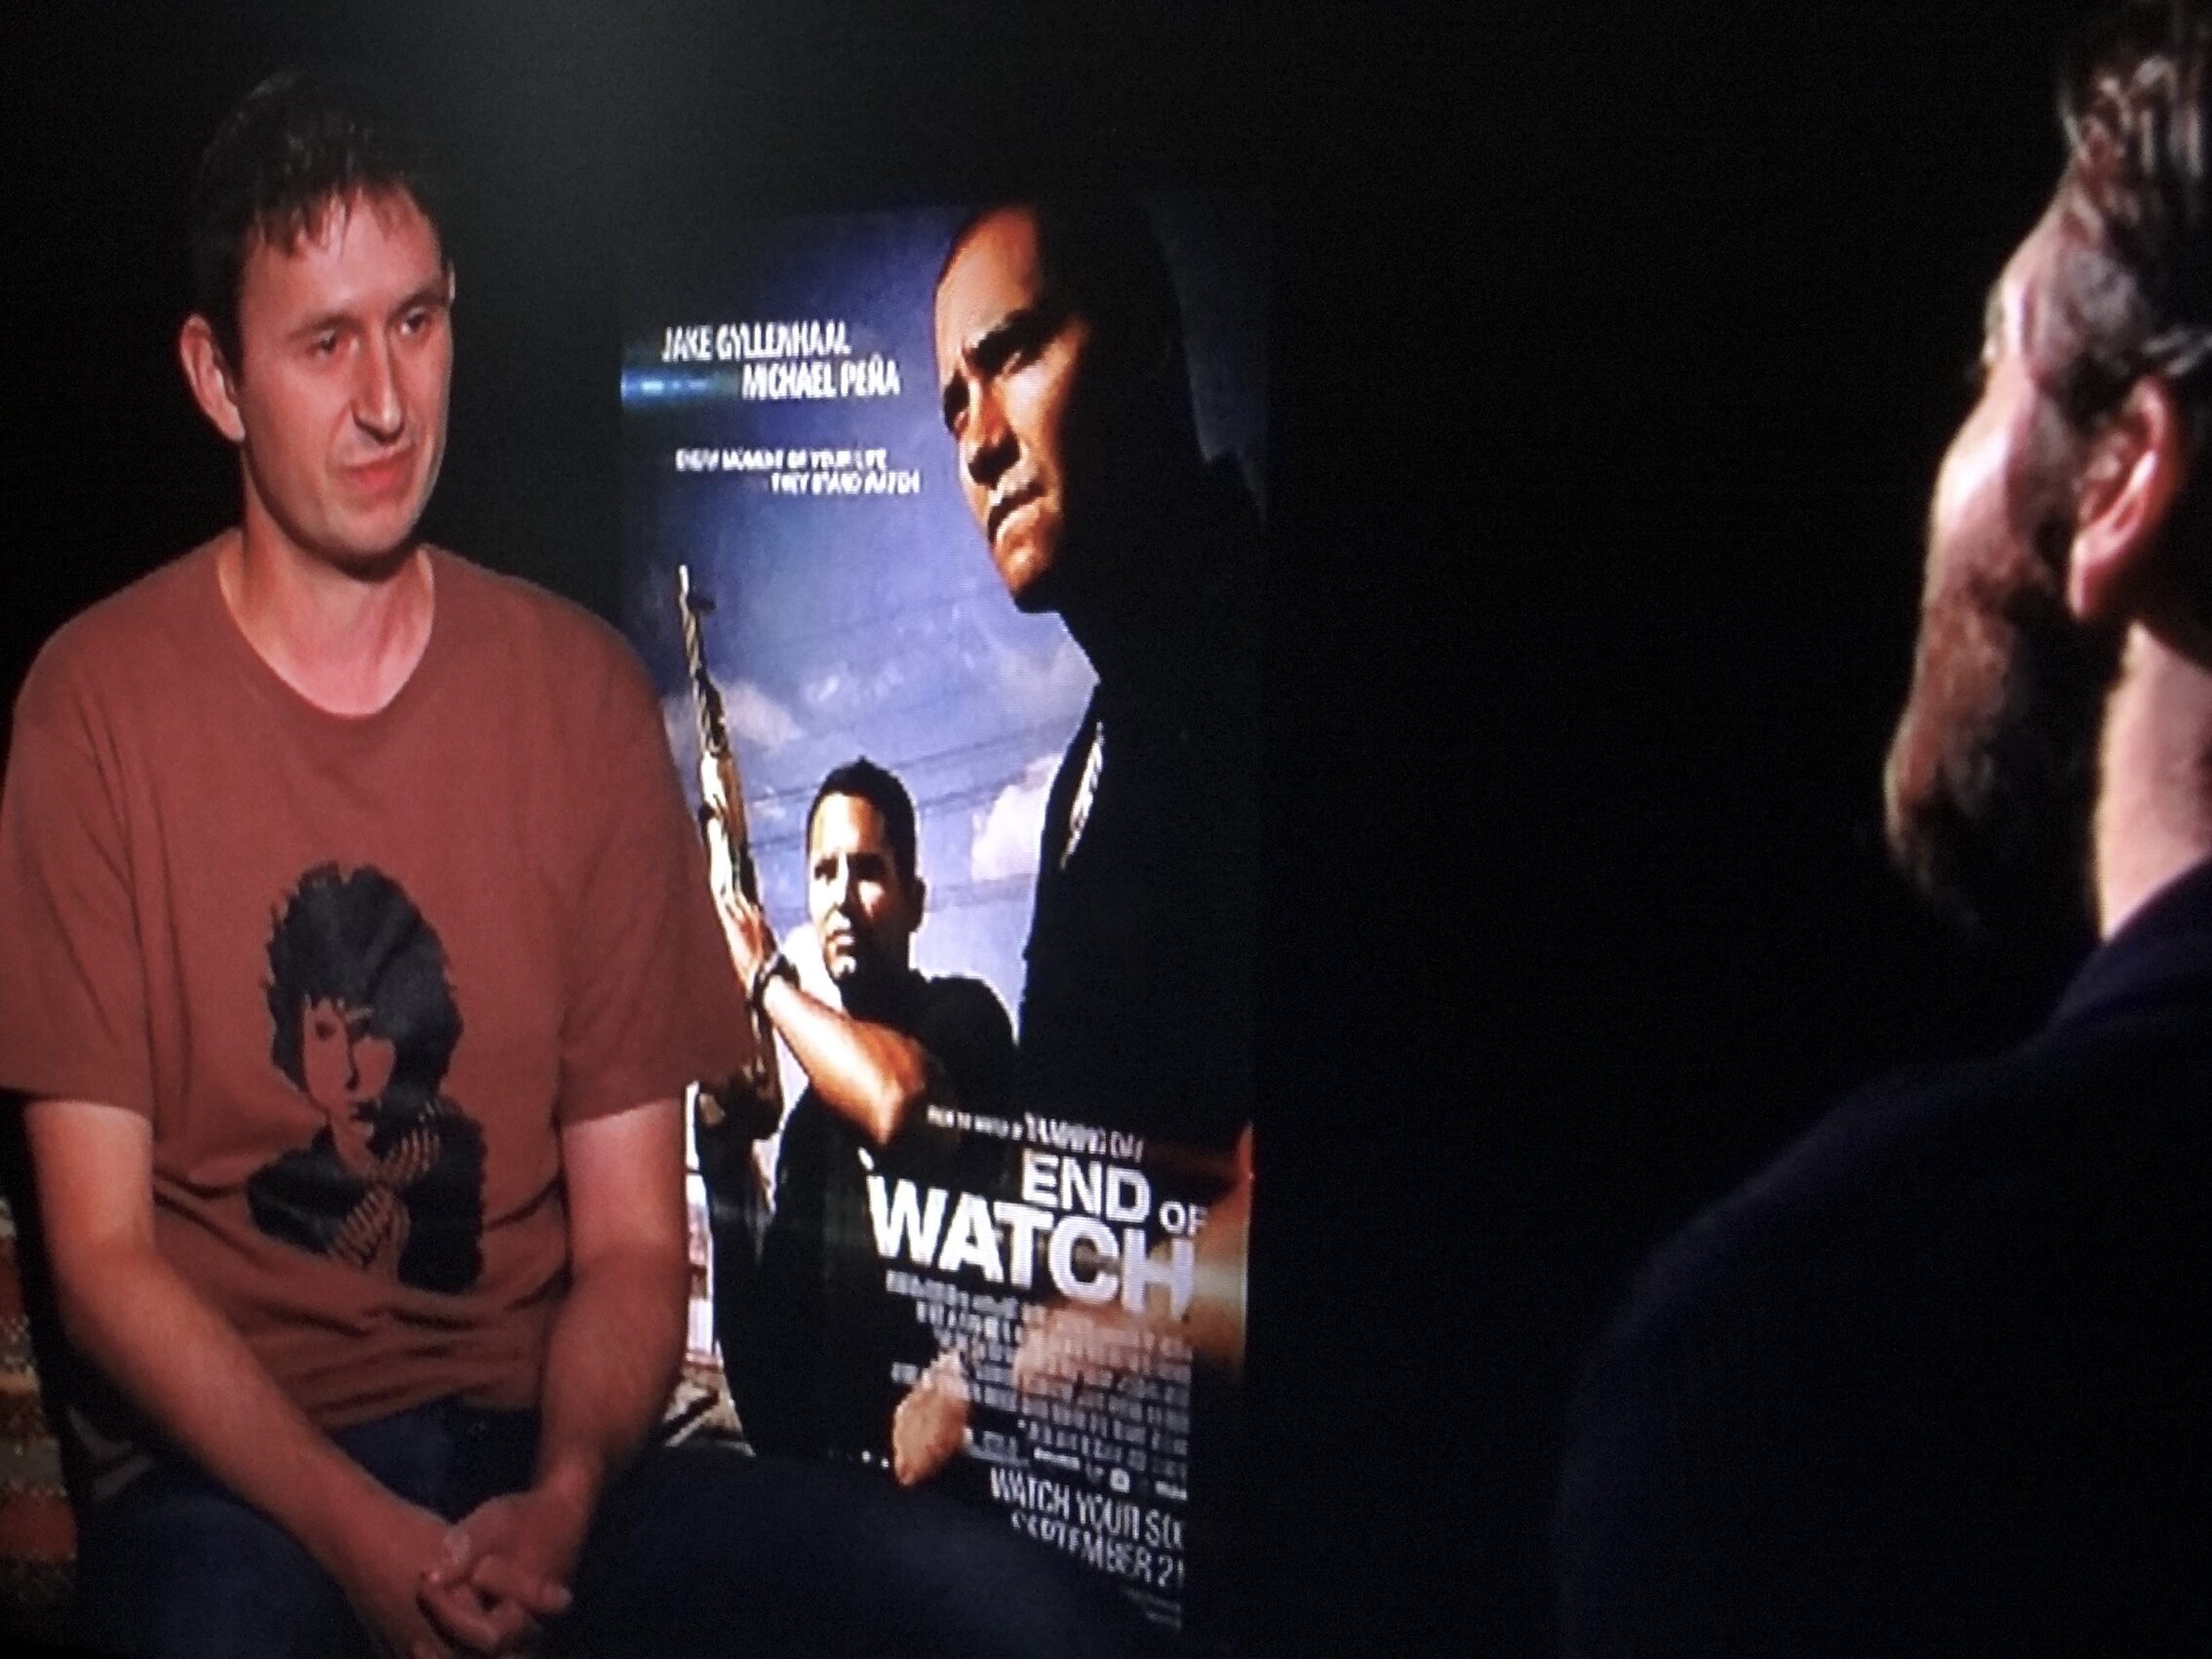 Interview with Jake Gyllenhaal End of Watch a short story from New York City